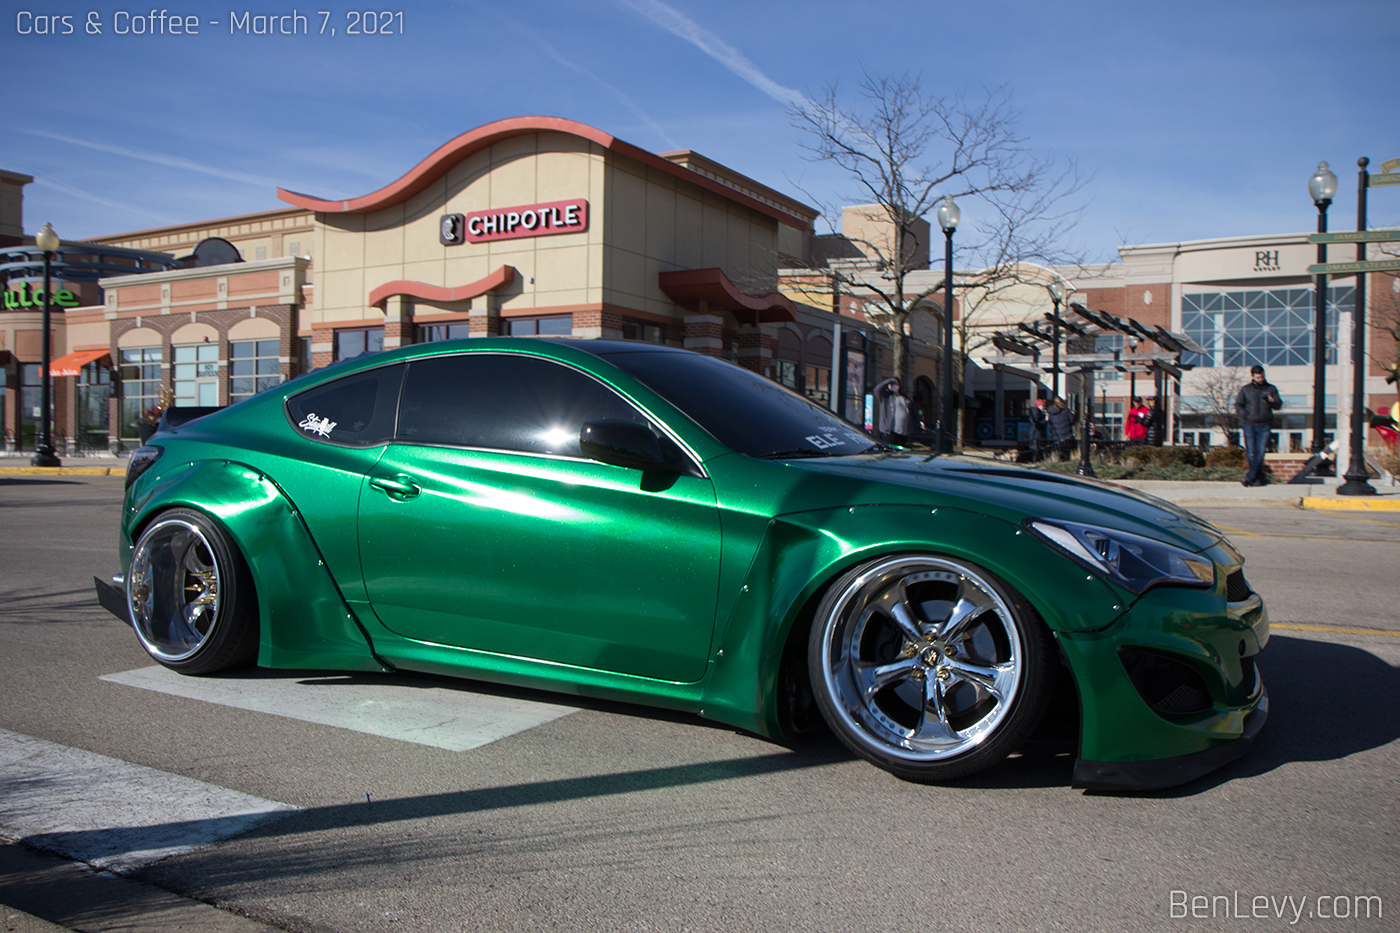 Green Widebody Hyundai Genesis Coupe at the Streets of Woodfield